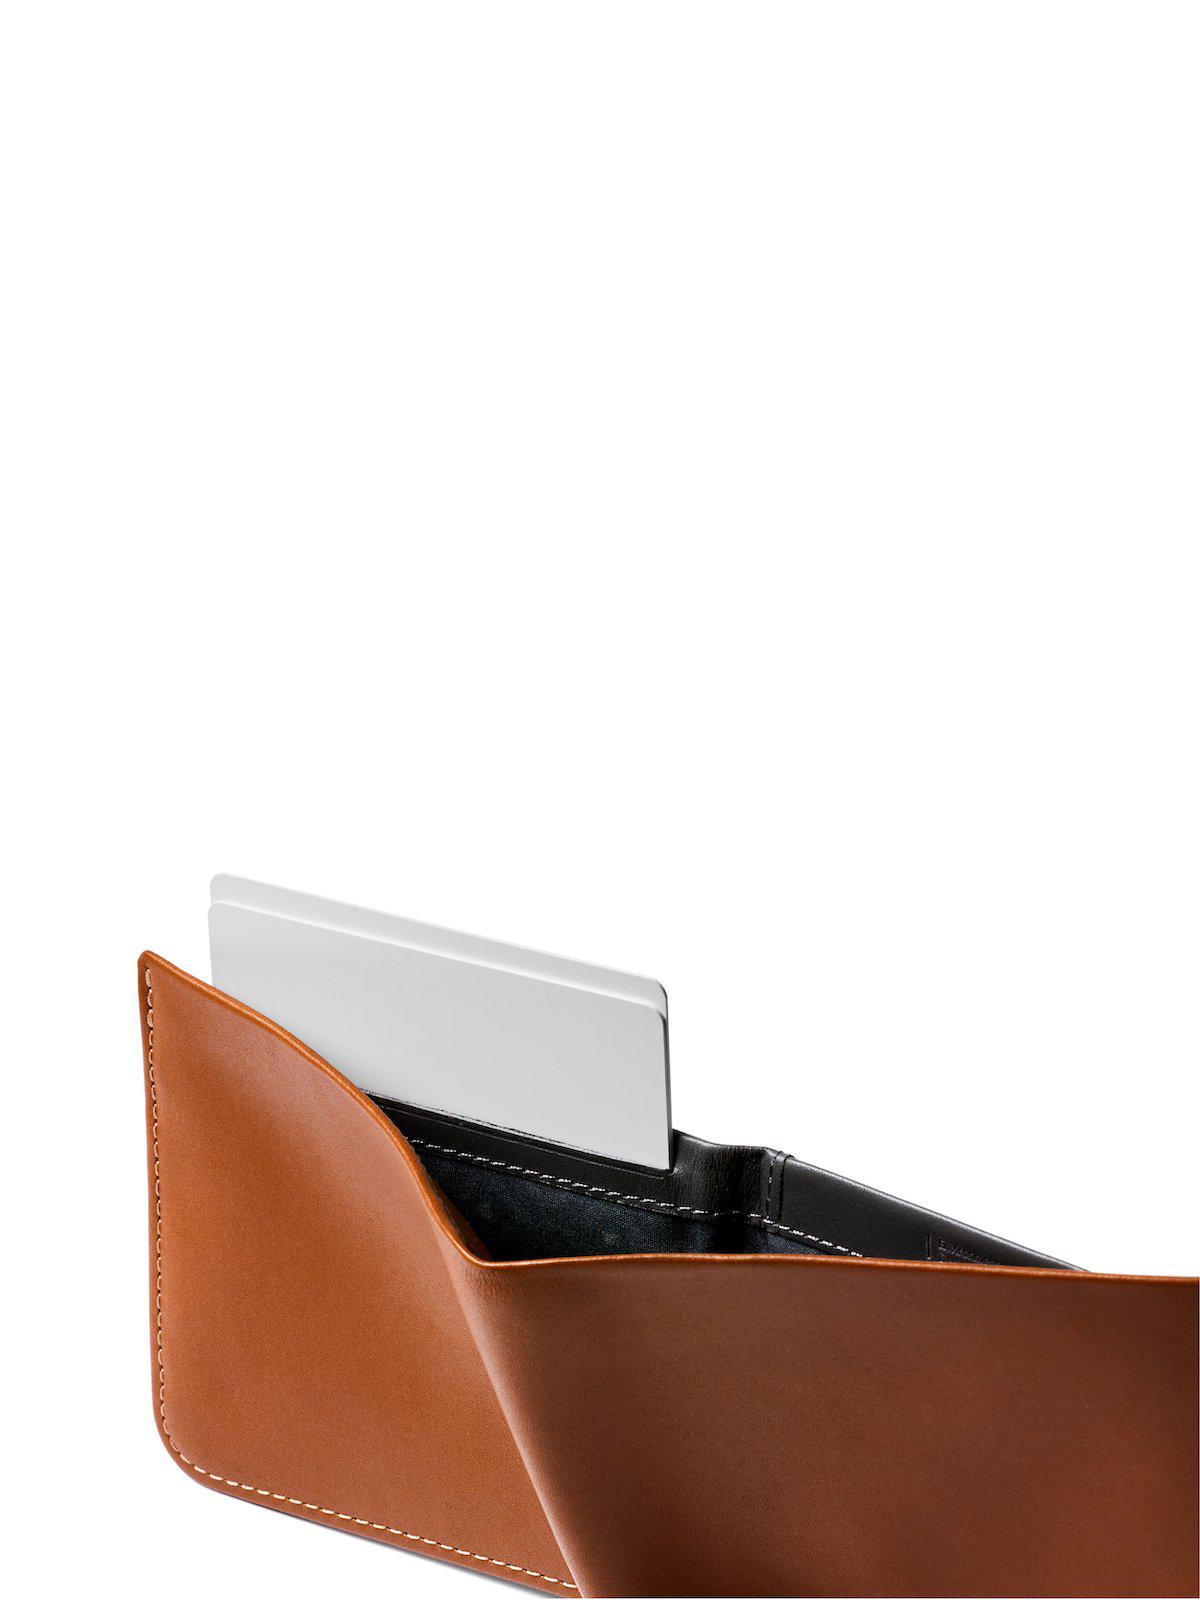 Bellroy Hide and Seek Wallet Caramel RFID - MORE by Morello Indonesia